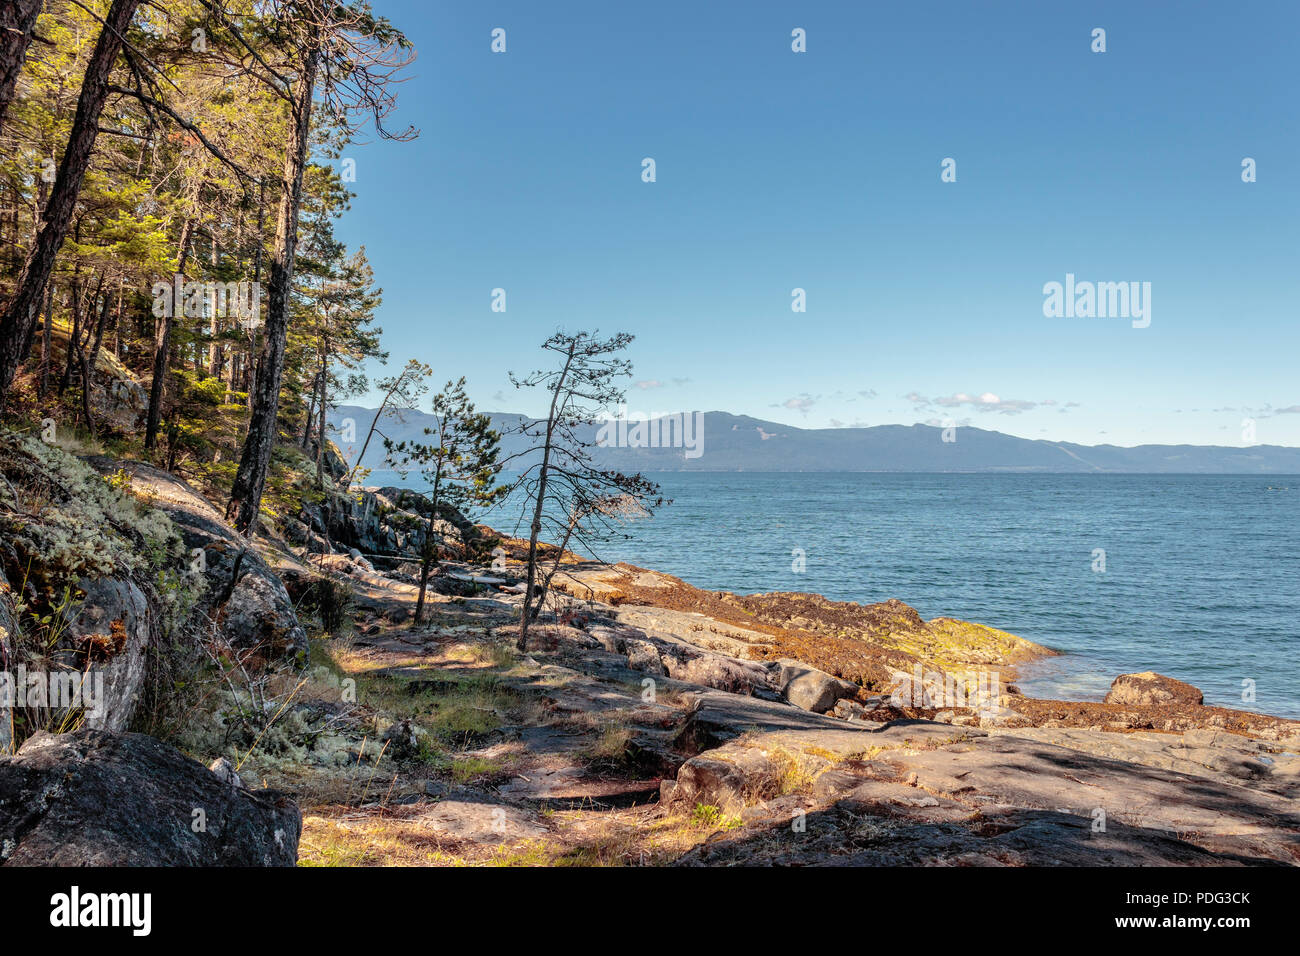 Golden sunlight and shadows fall across trees, mosses and a rocky shoreline on BC's Sunshine Coast, with a view of Malaspina Strait and Texada Island. Stock Photo